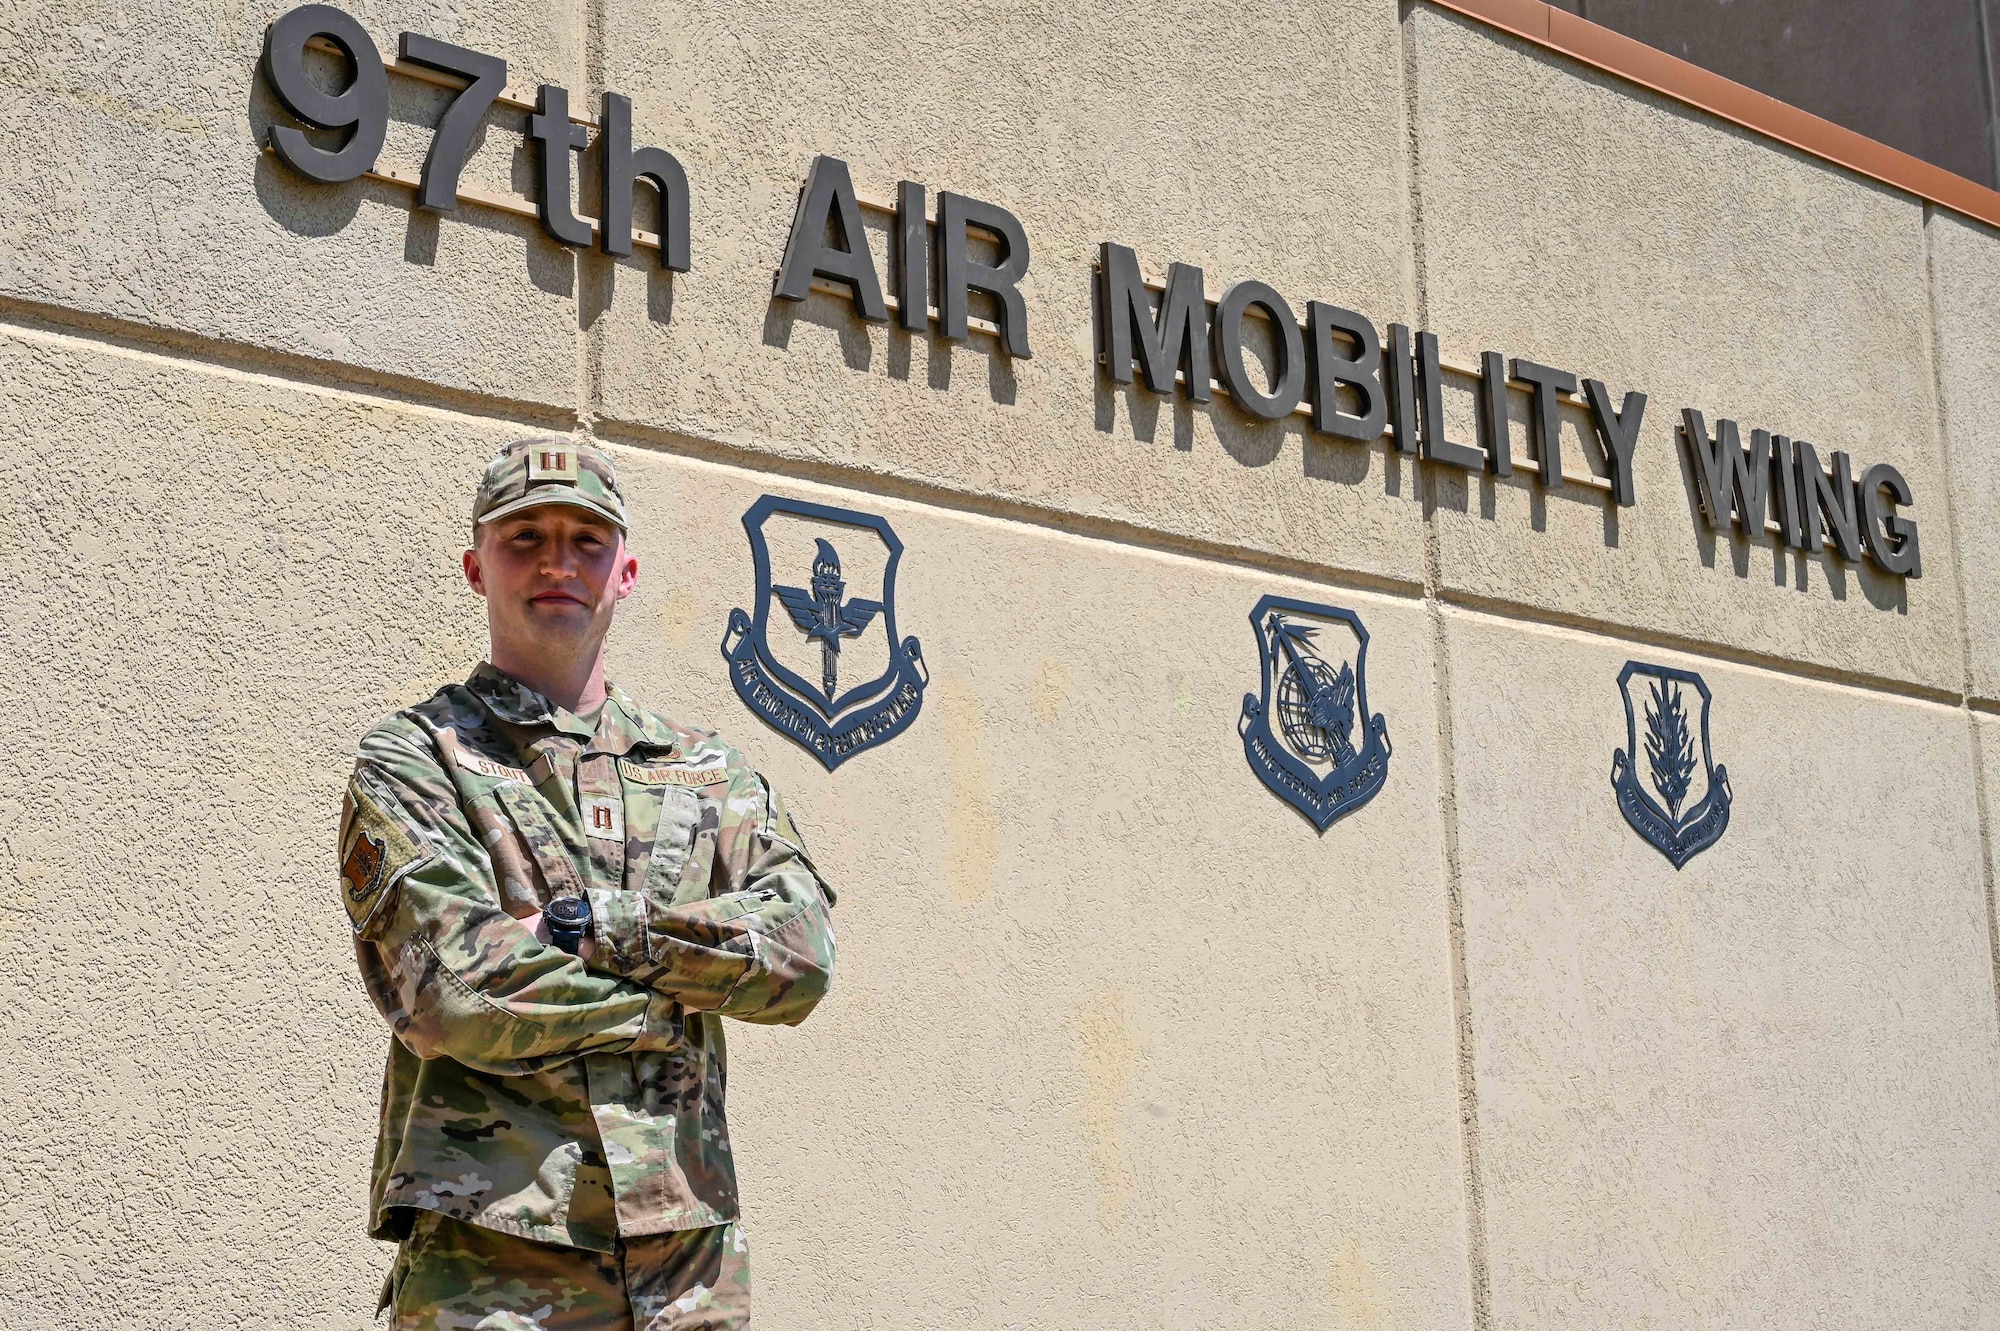 U.S. Air Force Capt. Tyler Stout, 97th Air Mobility Wing executive officer, poses for a photo outside his workplace at Altus Air Force Base, Oklahoma, June 29, 2023. Stout commissioned in 2019 from the United States Air Force Academy and plans to stay for the foreseeable future. (U.S. Air Force photo by Senior Airman Kayla Christenson)